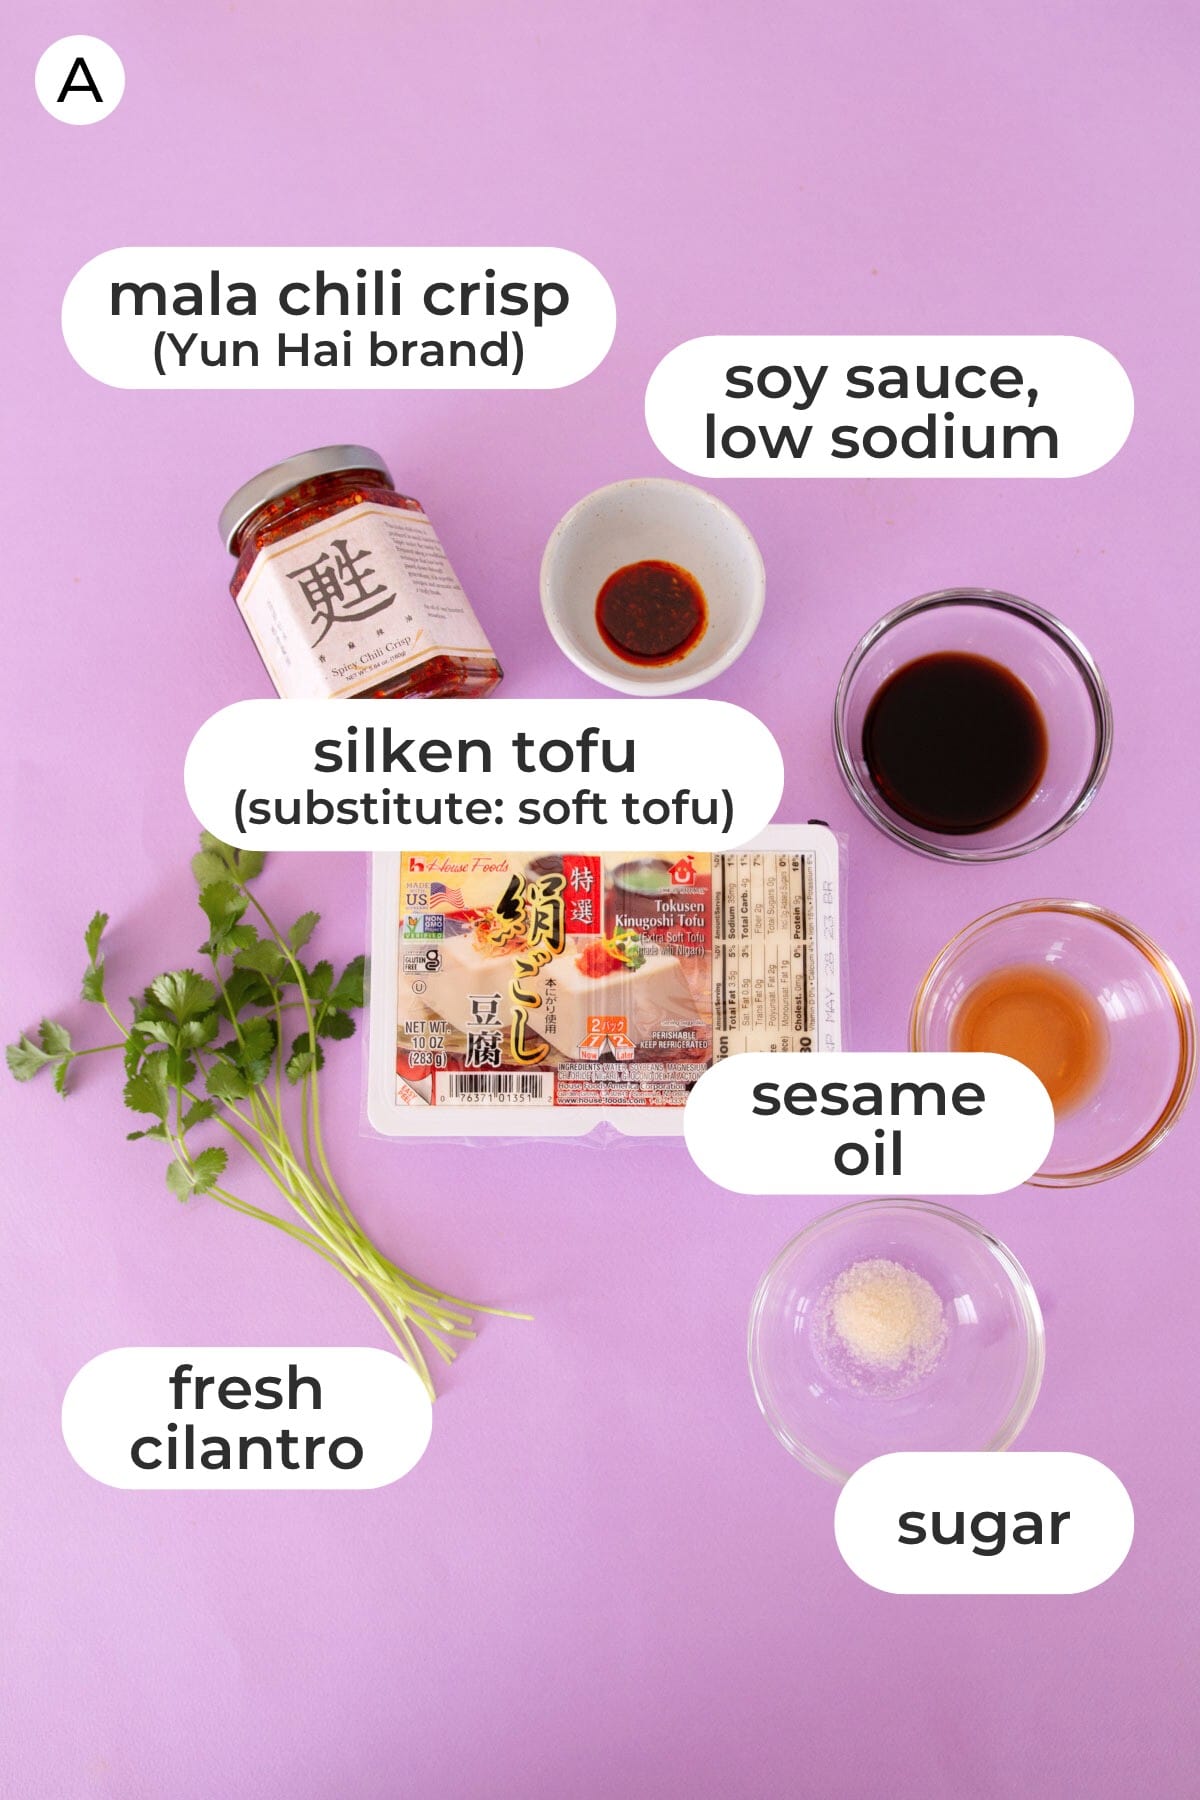 Ingredients of silken tofu with mala chili crisp topping laid out over a purple background and labeled with an "A" as well as the ingredient names: mala chili crisp (Yun Hai brand), low sodium soy sauce, silken tofu (substitute: soft tofu), sesame oil, fresh cilantro, and sugar.